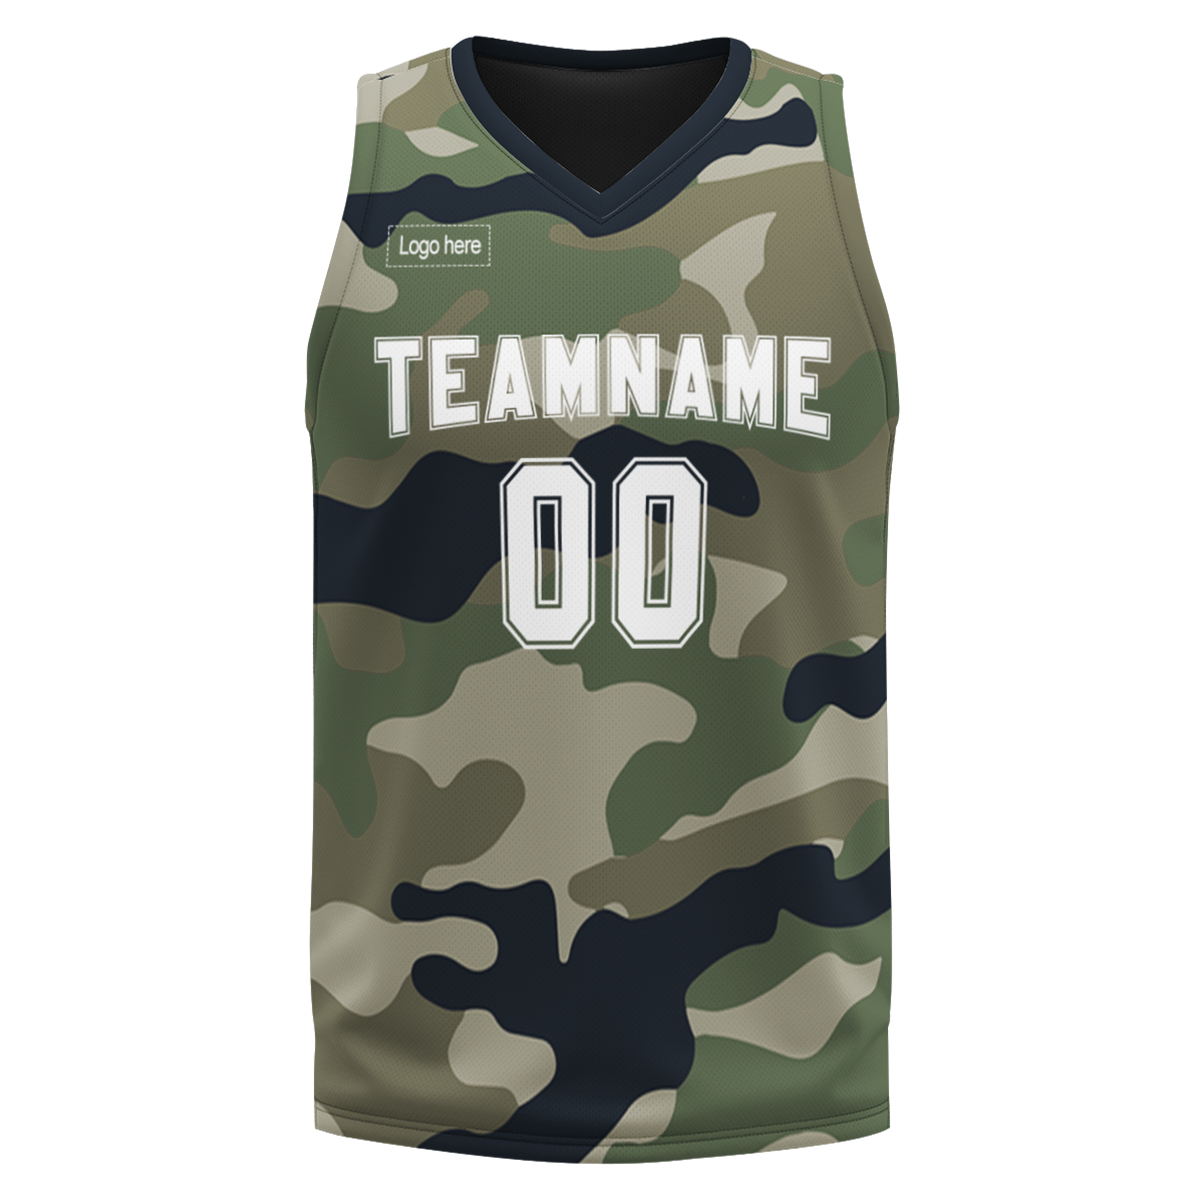 customized-basketball-uniforms-personalized-design-printing-sport-clothes-summer-basketball-jerseys-for-men-at-cj-pod-4